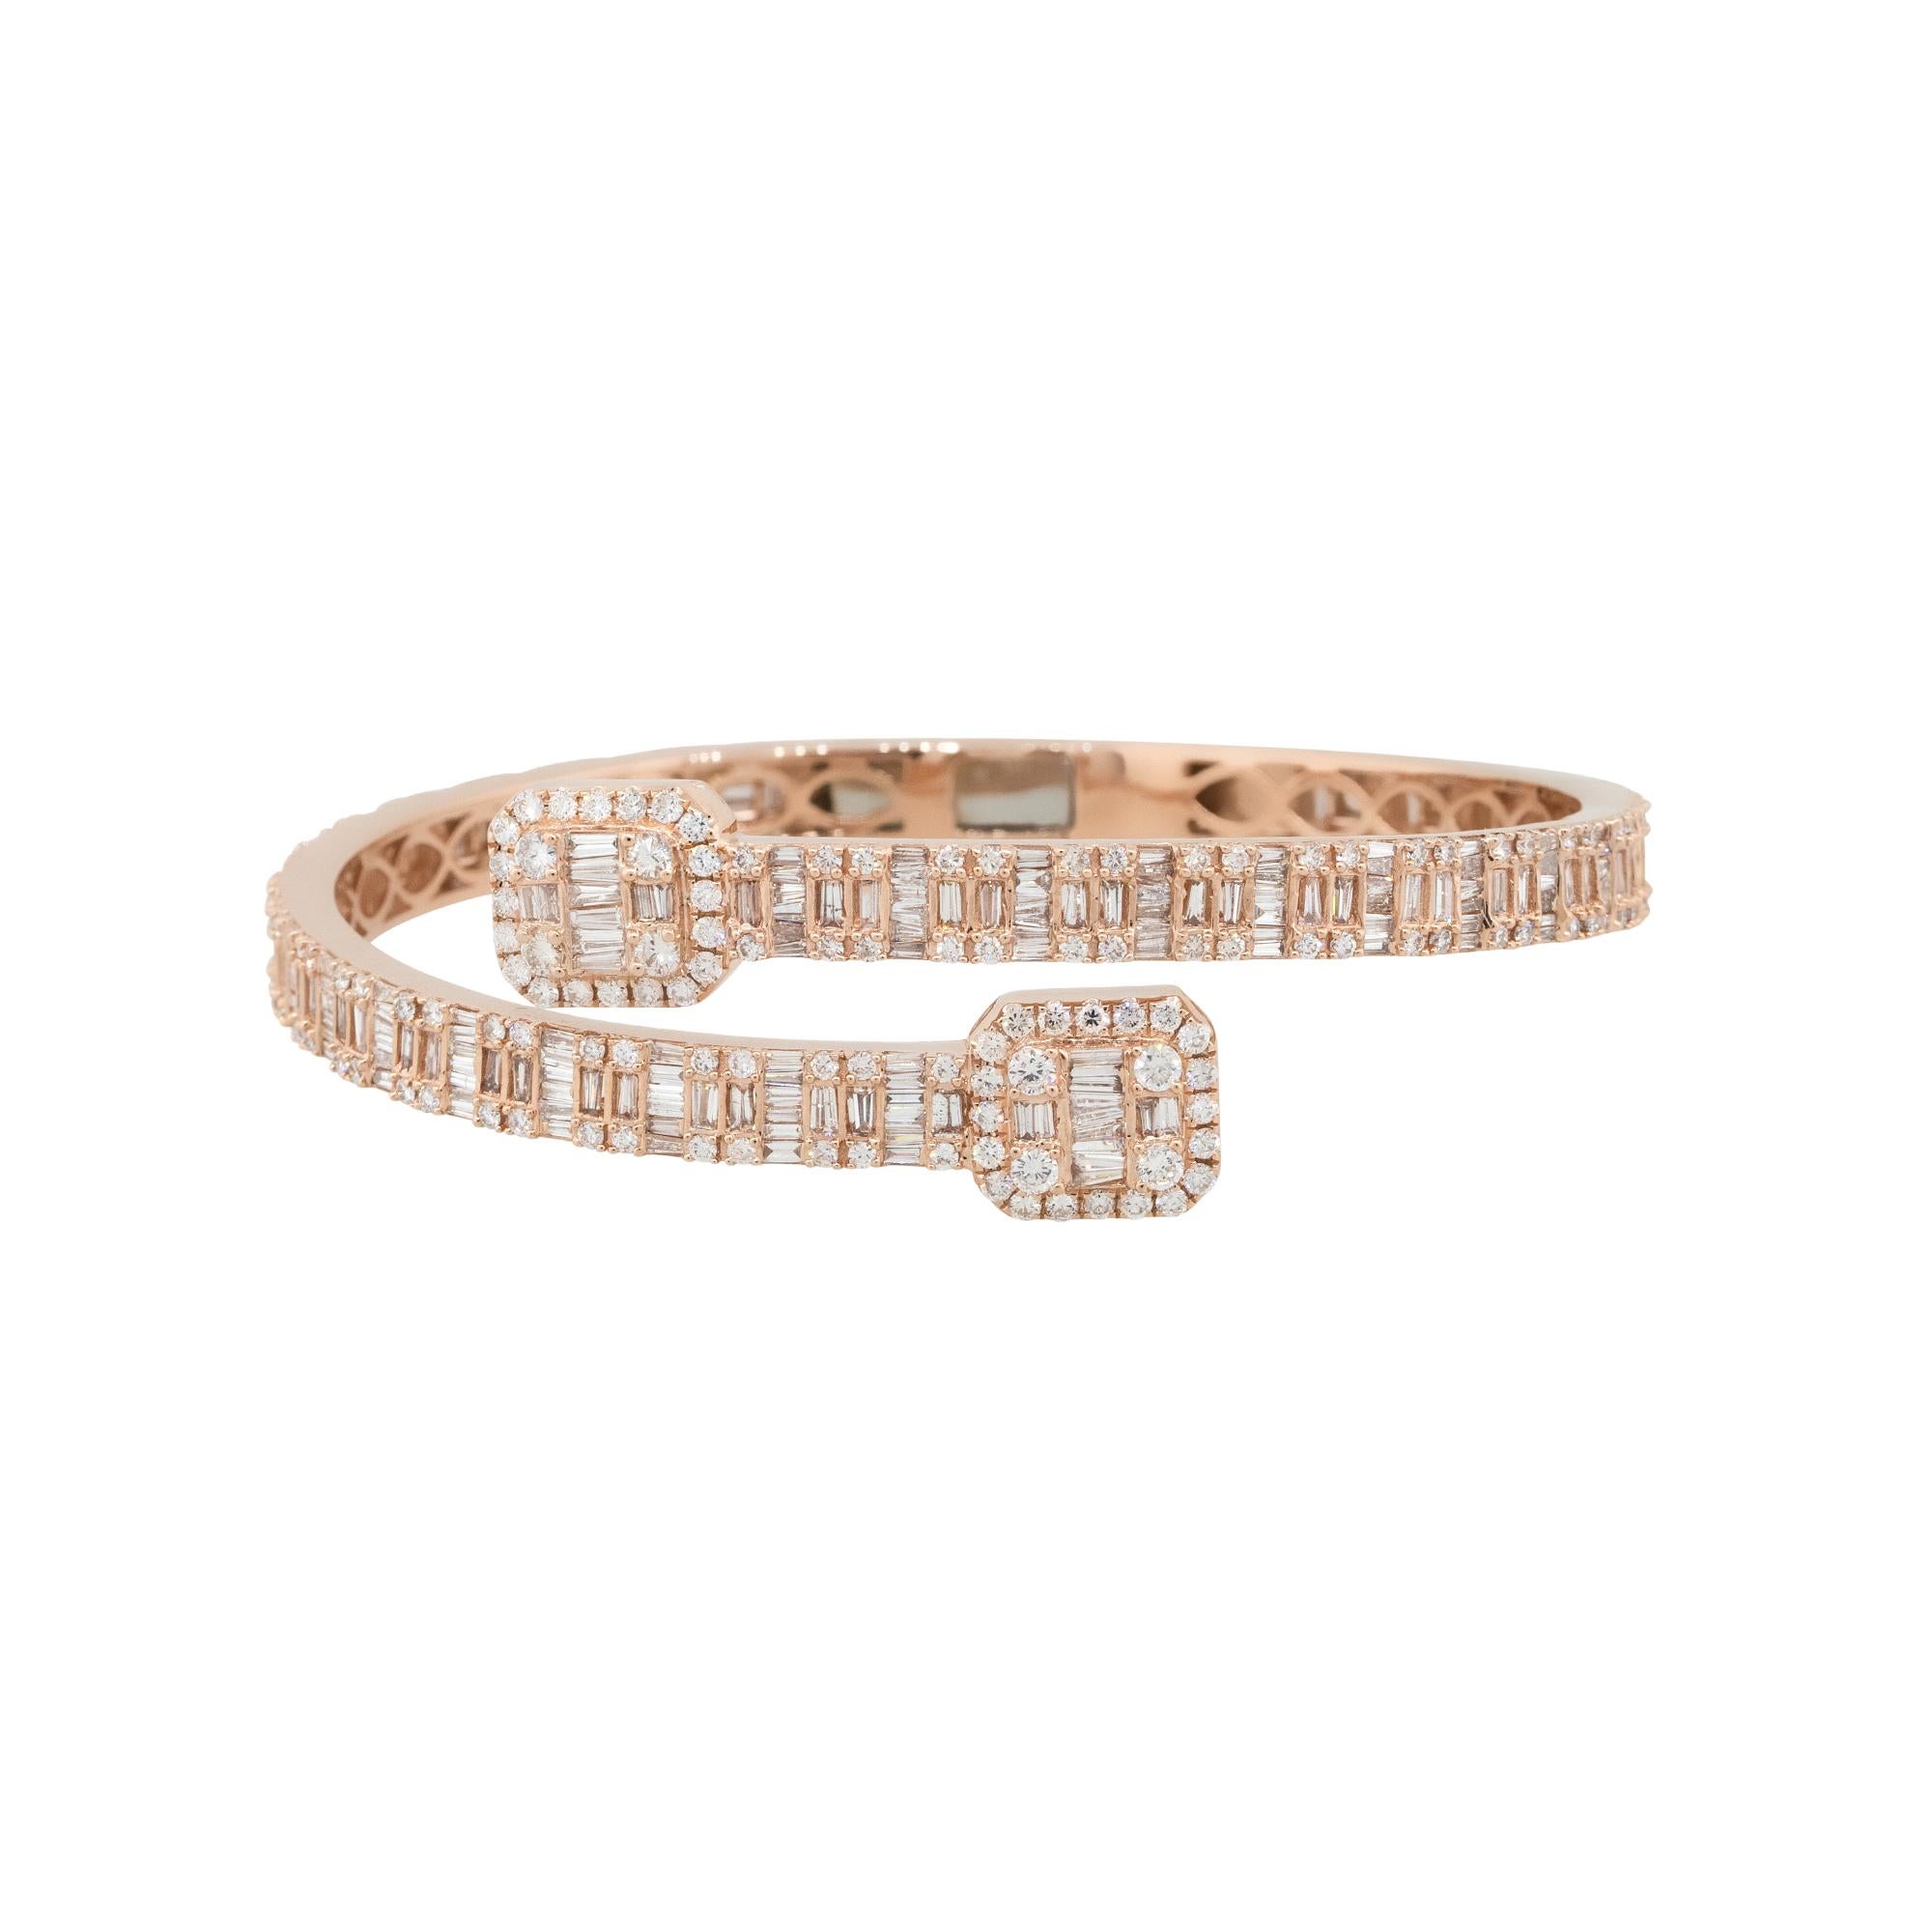 Material: 14k Rose gold
Diamond Details: Approx. 8.75ctw of round and baguette cut Diamonds. Diamonds are G/H in color and VS in clarity
Measurements: 64mm x 14.5mm x 57mm
                           Will fit up to a 8